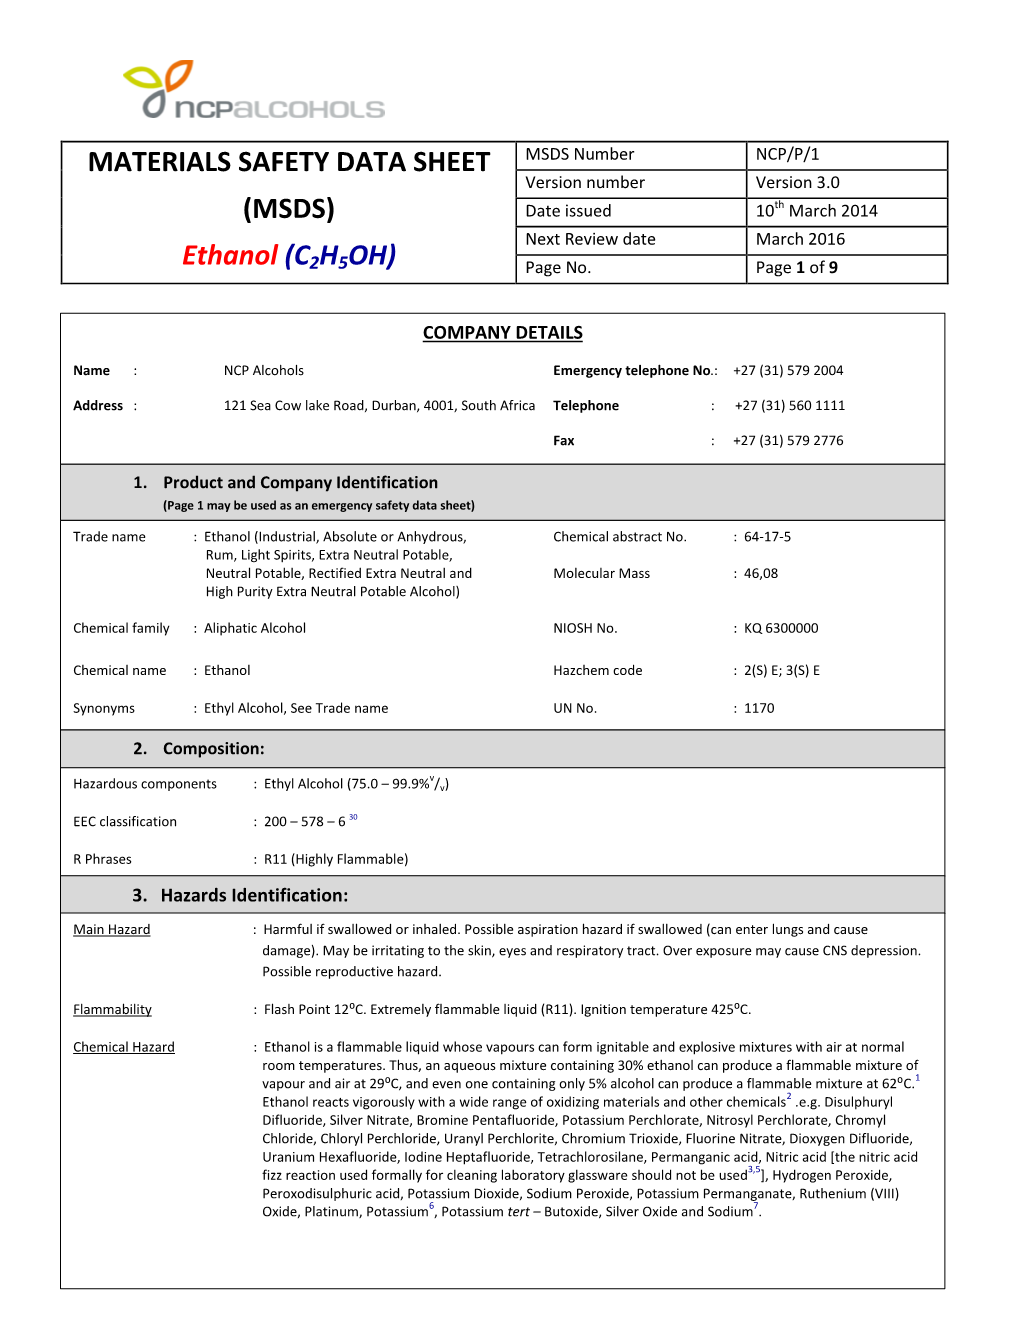 MATERIALS SAFETY DATA SHEET (MSDS) Ethanol (C2H5OH)